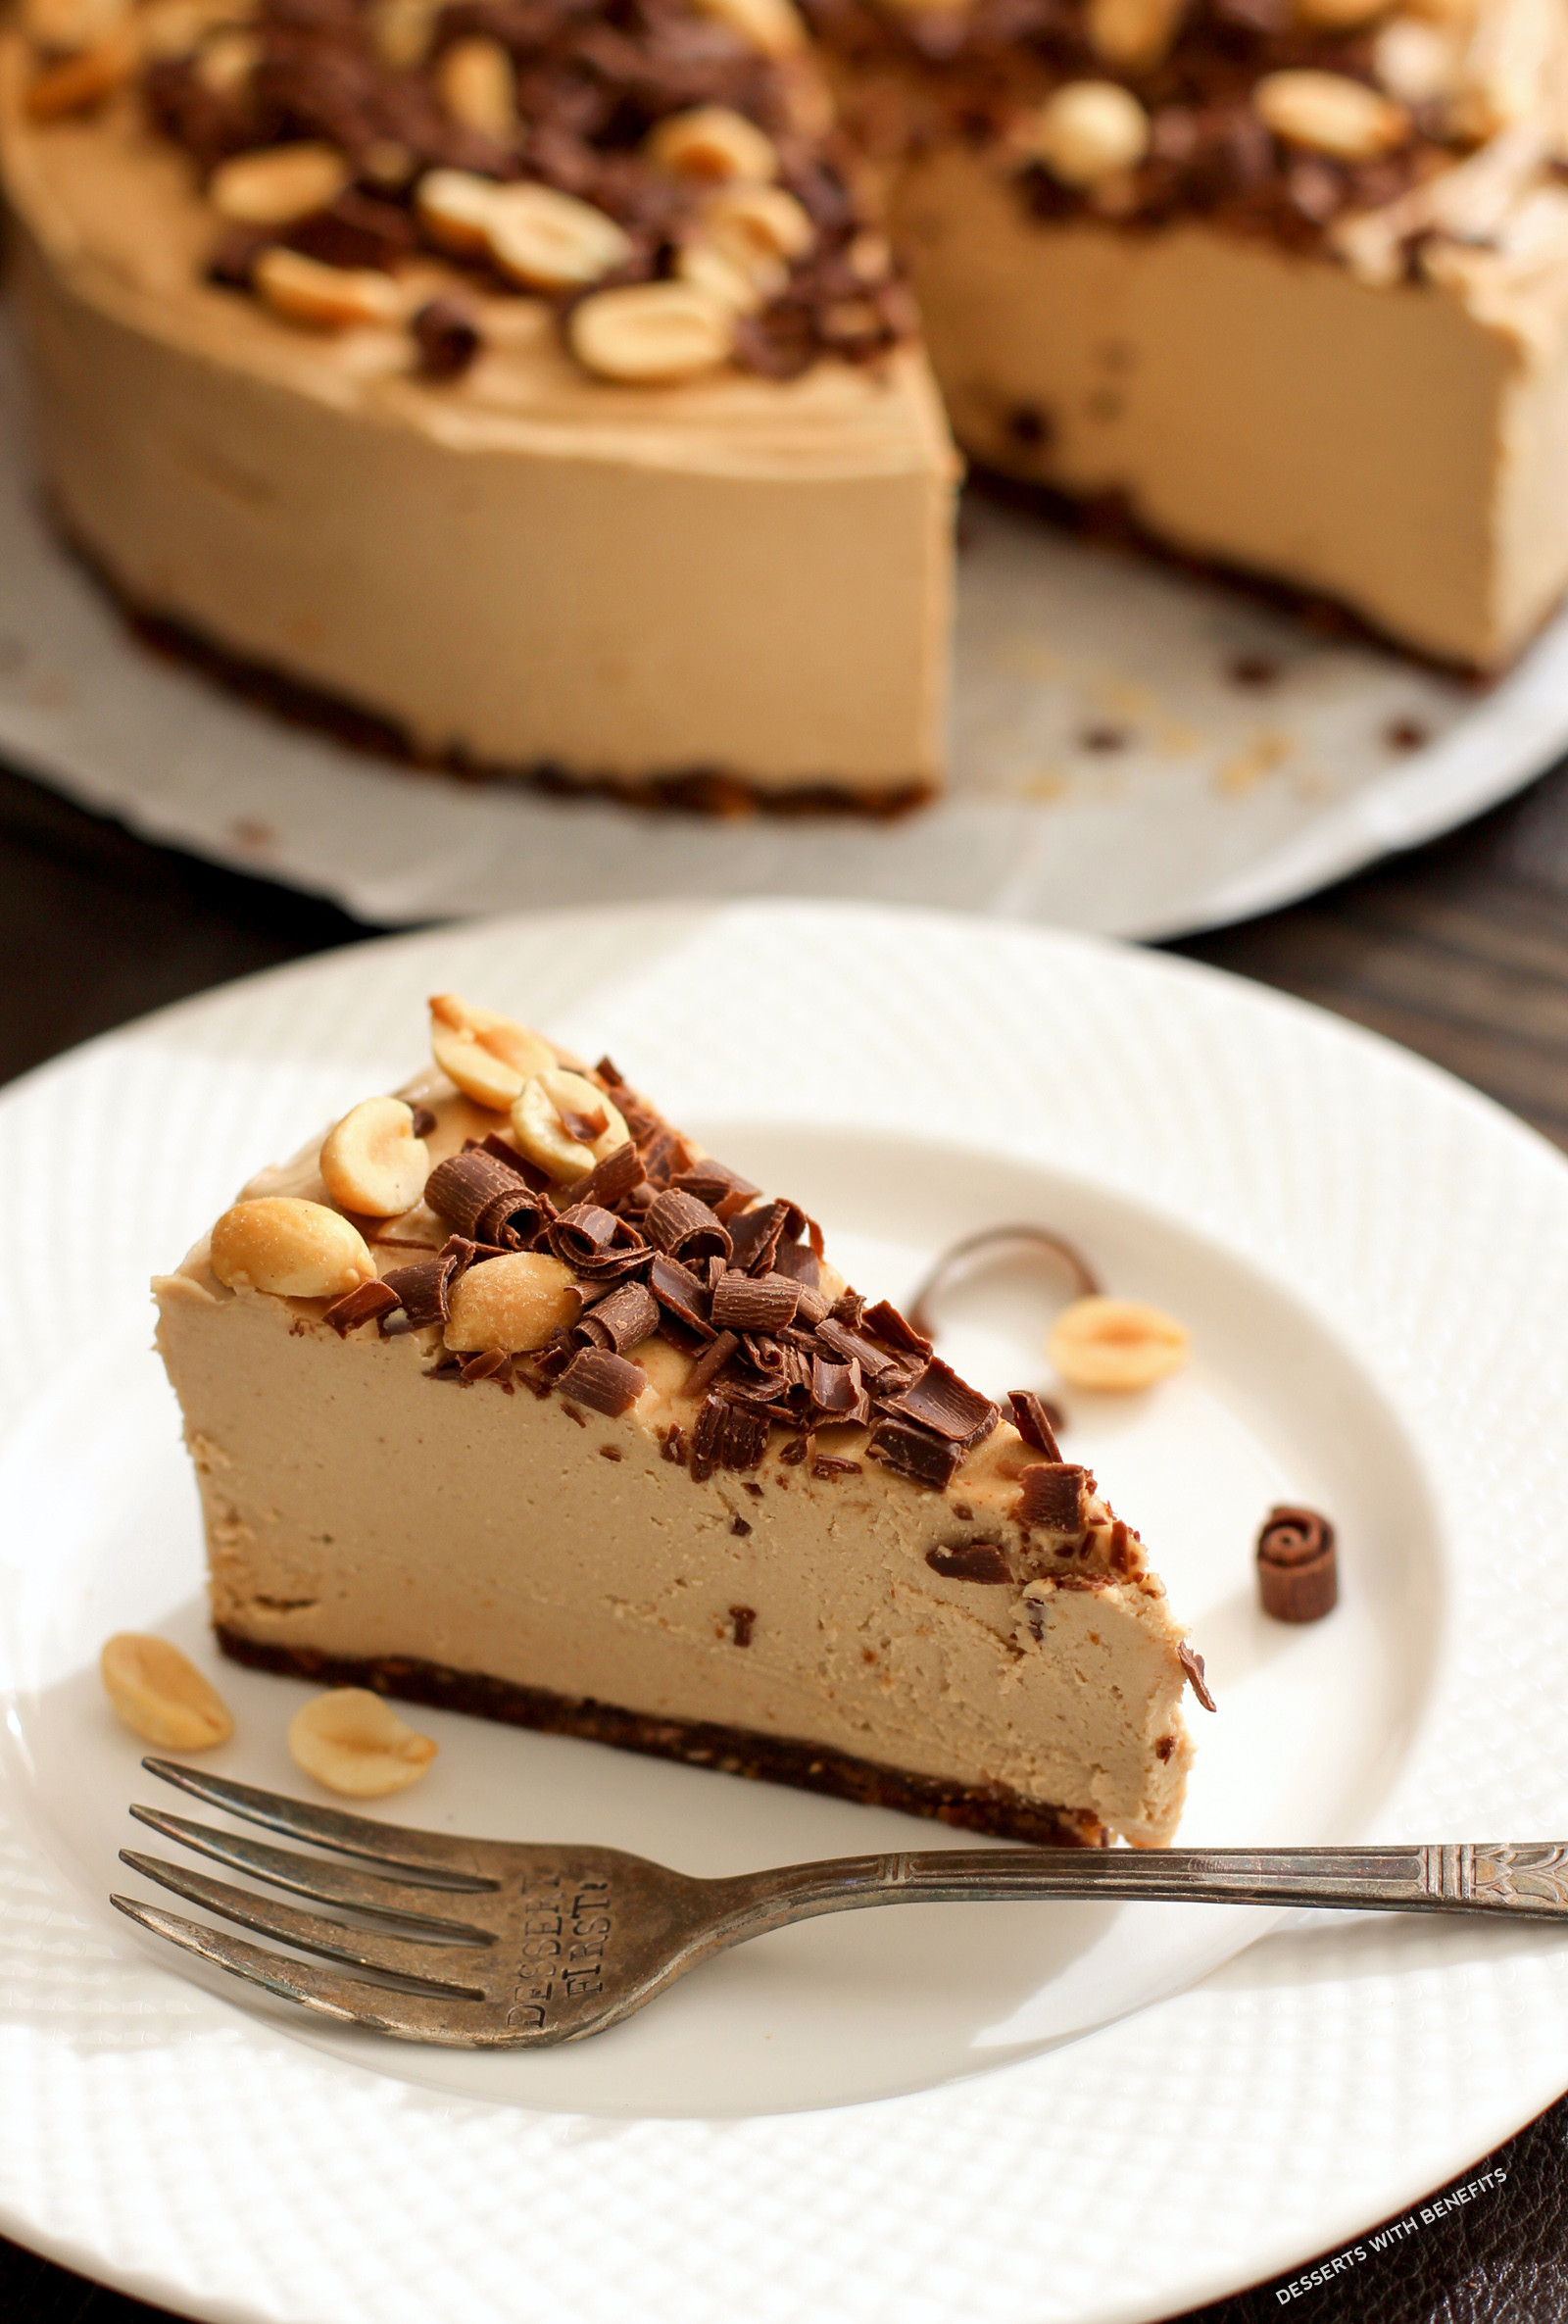 No Bake Healthy Desserts
 Healthy Chocolate Peanut Butter Raw Cheesecake